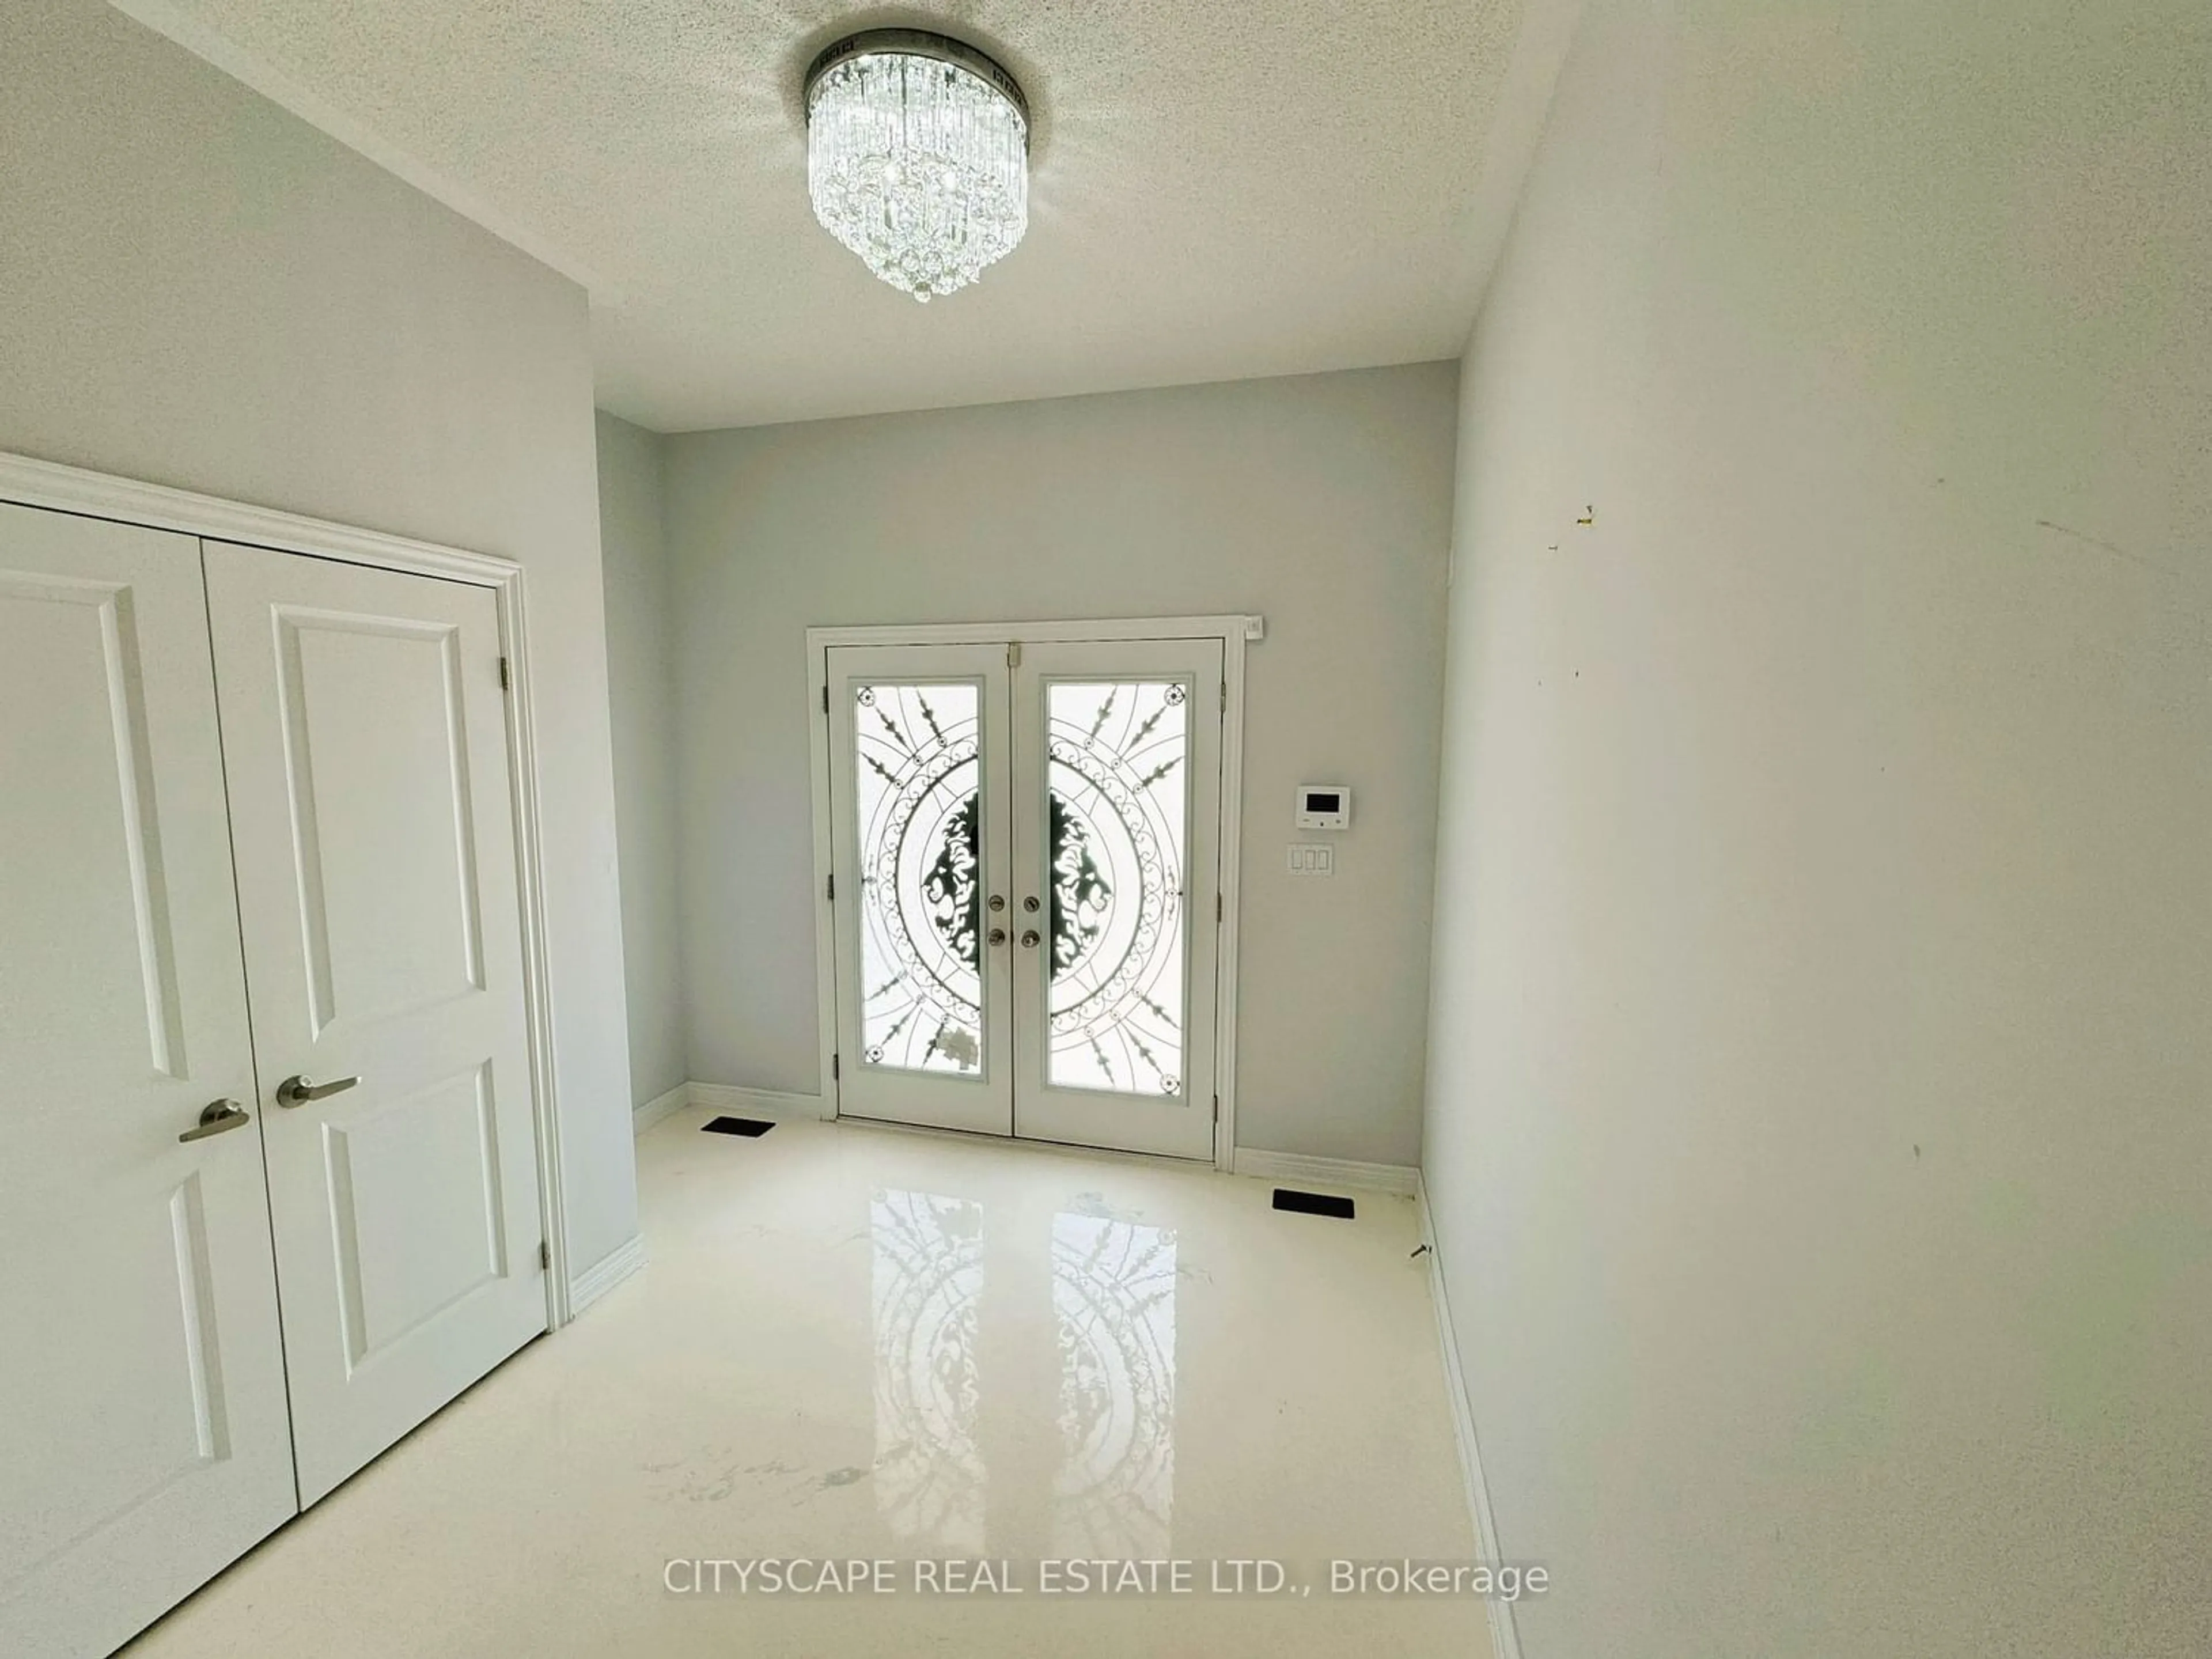 Indoor entryway for 40 Sparkle Dr, Thorold Ontario L2V 0H2